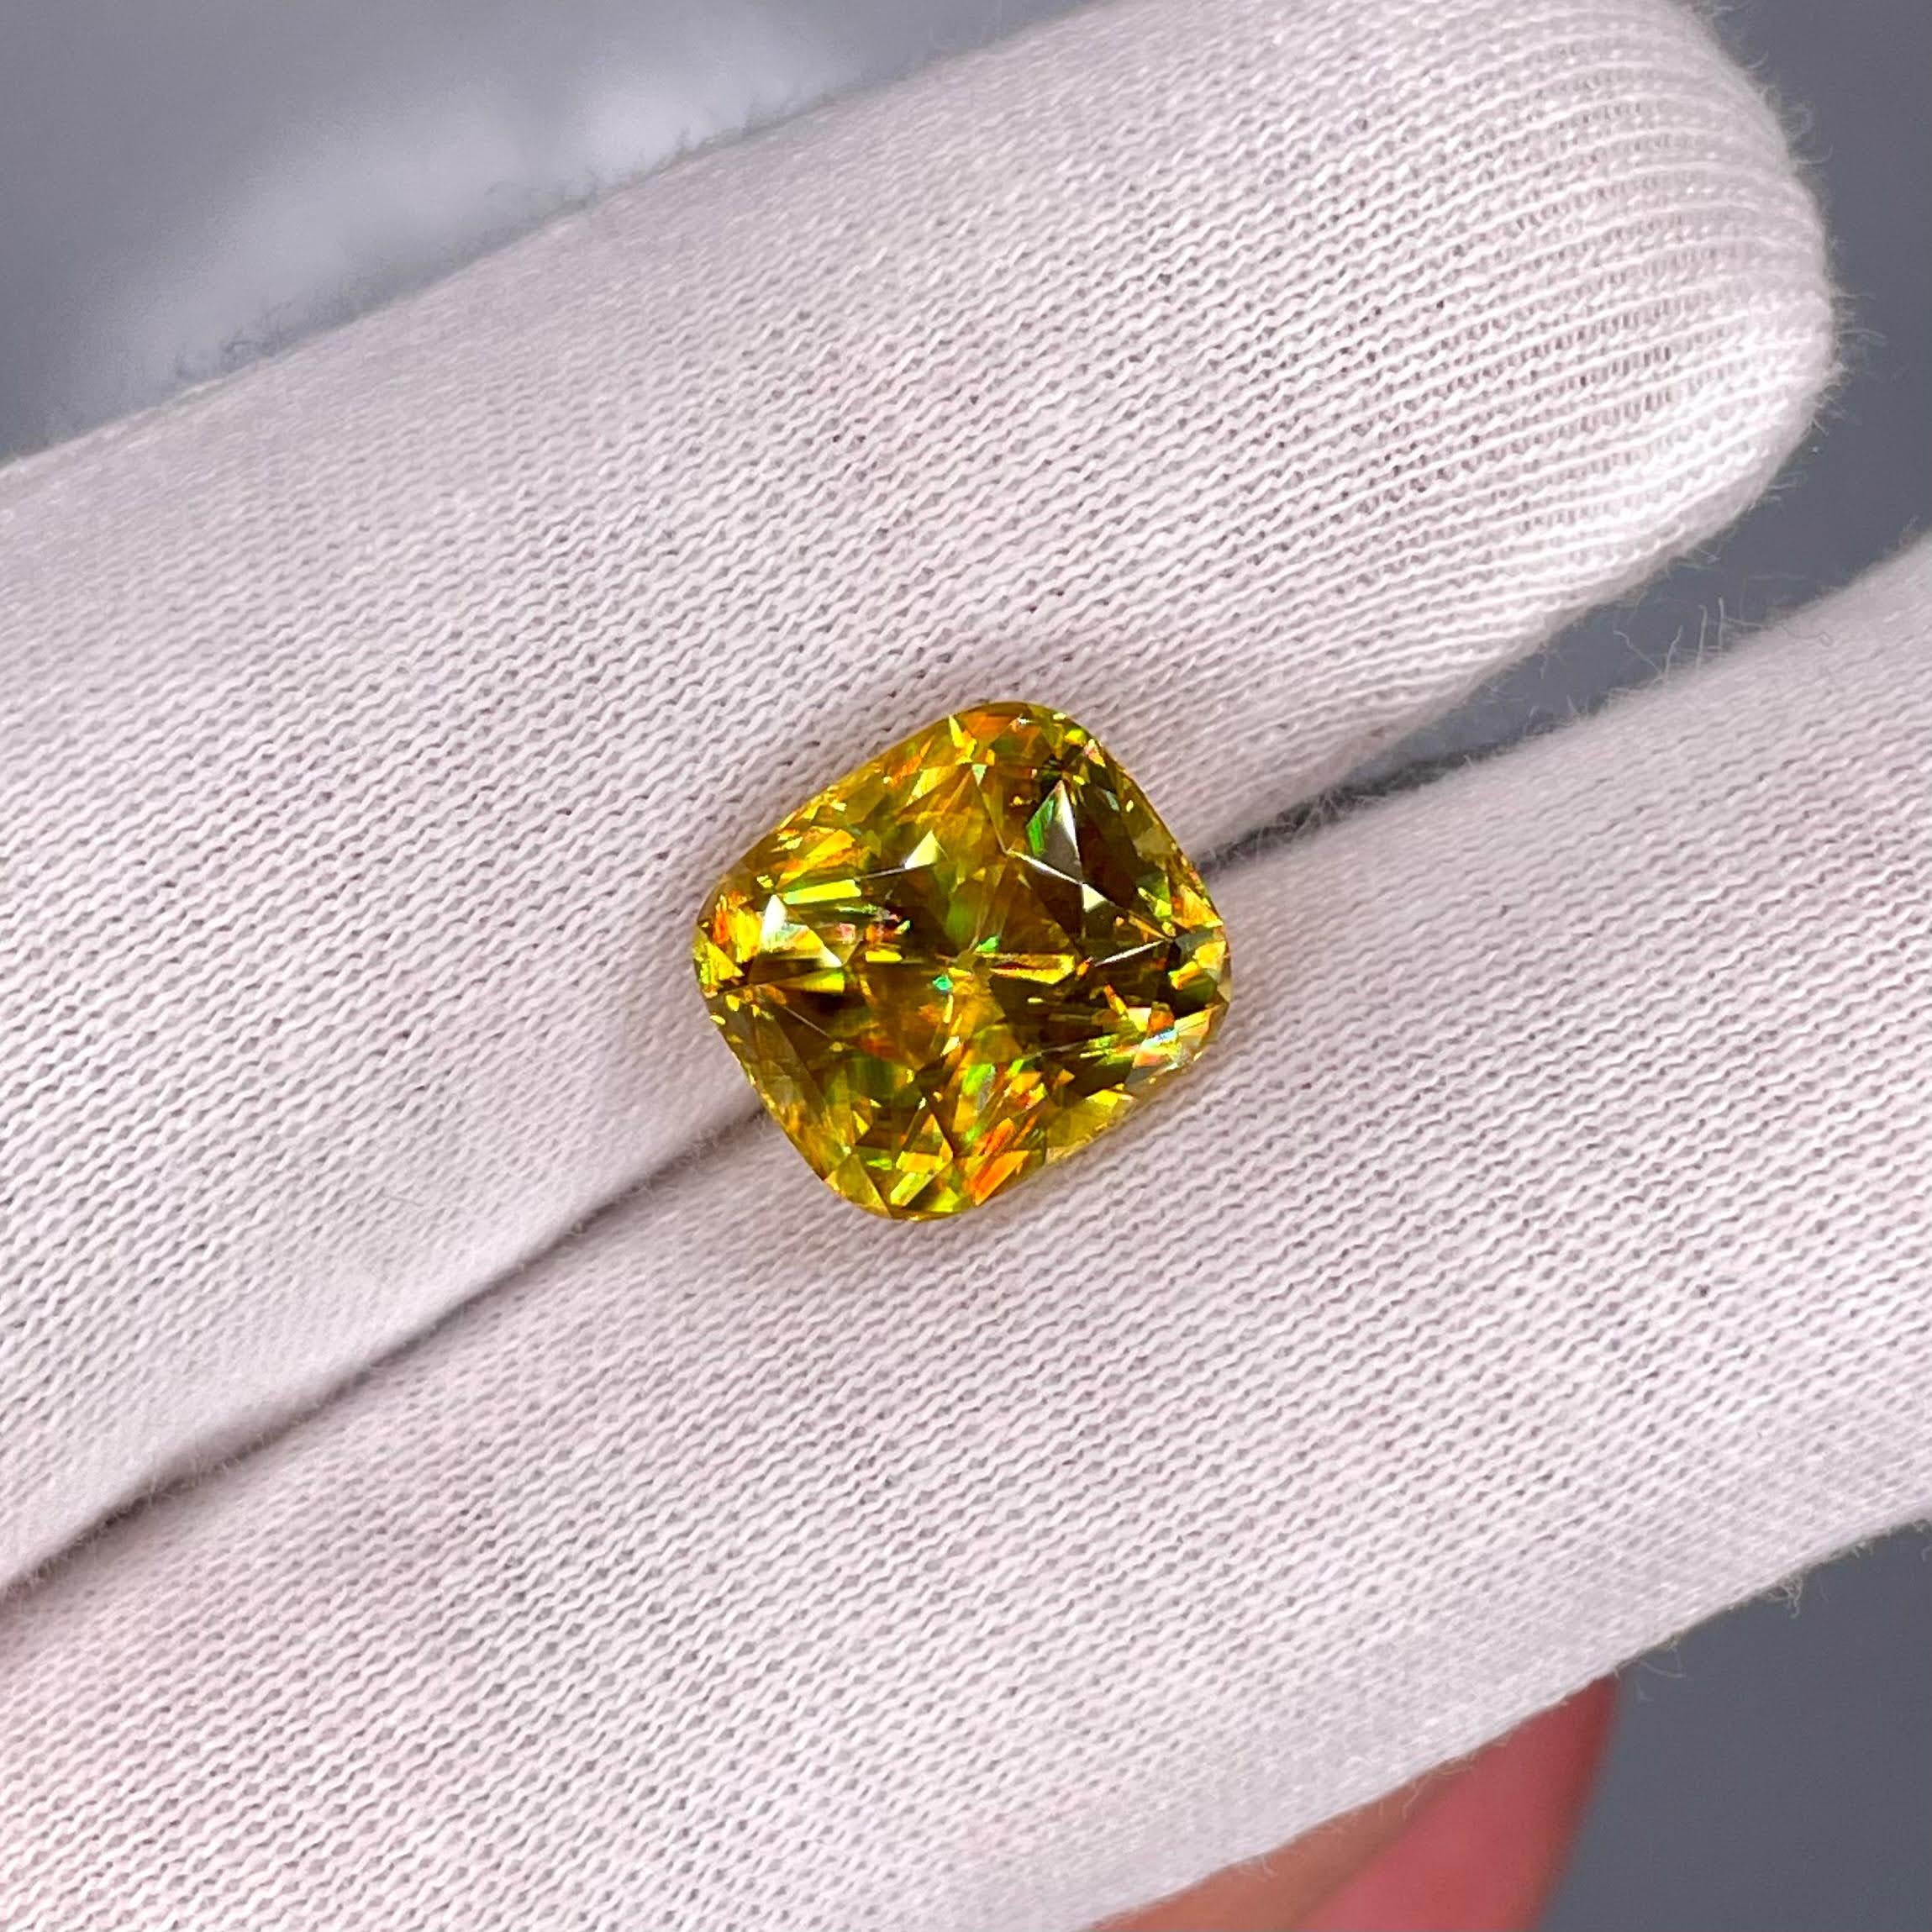 Weight 6.15 carats 
Dimensions 10.73x9.71x7.45 mm
Treatment none 
Origin Madagascar 
Clarity VVs
Shape cushion 
Cut fancy cushion 



The 6.15 carats Fine Quality Sphene Stone, with its mesmerizing Fancy Cushion Cut, stands as a radiant testament to